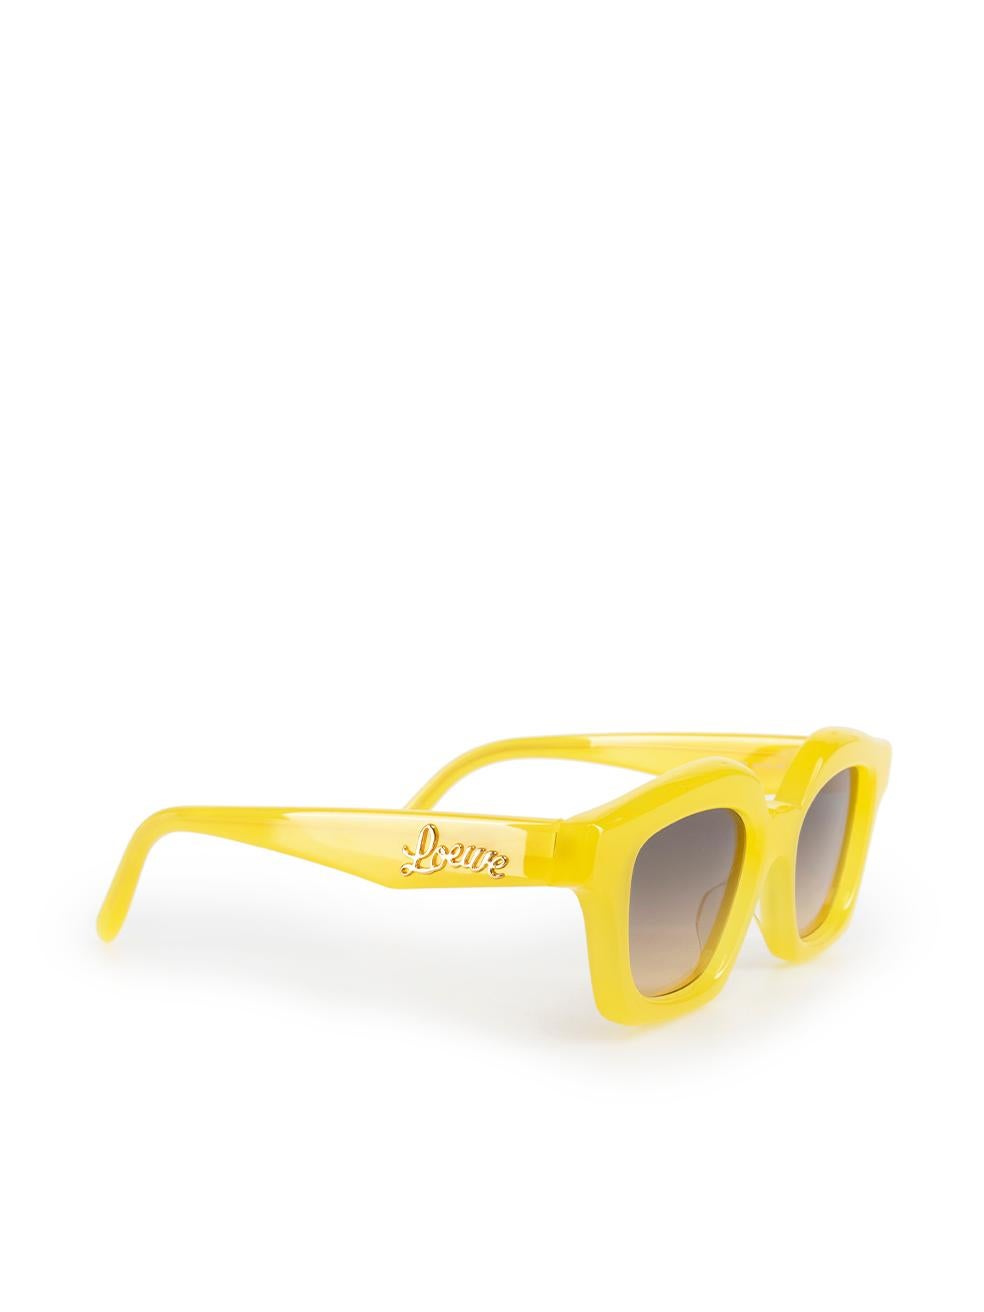 CONDITION is Never Worn. No visible wear to sunglasses is evident on this used Loewe designer resale item. Comes in original leather case.
 
Details
Yellow
Plastic
Sunglasses
Square frame
Tinted gradient black lens

Made in